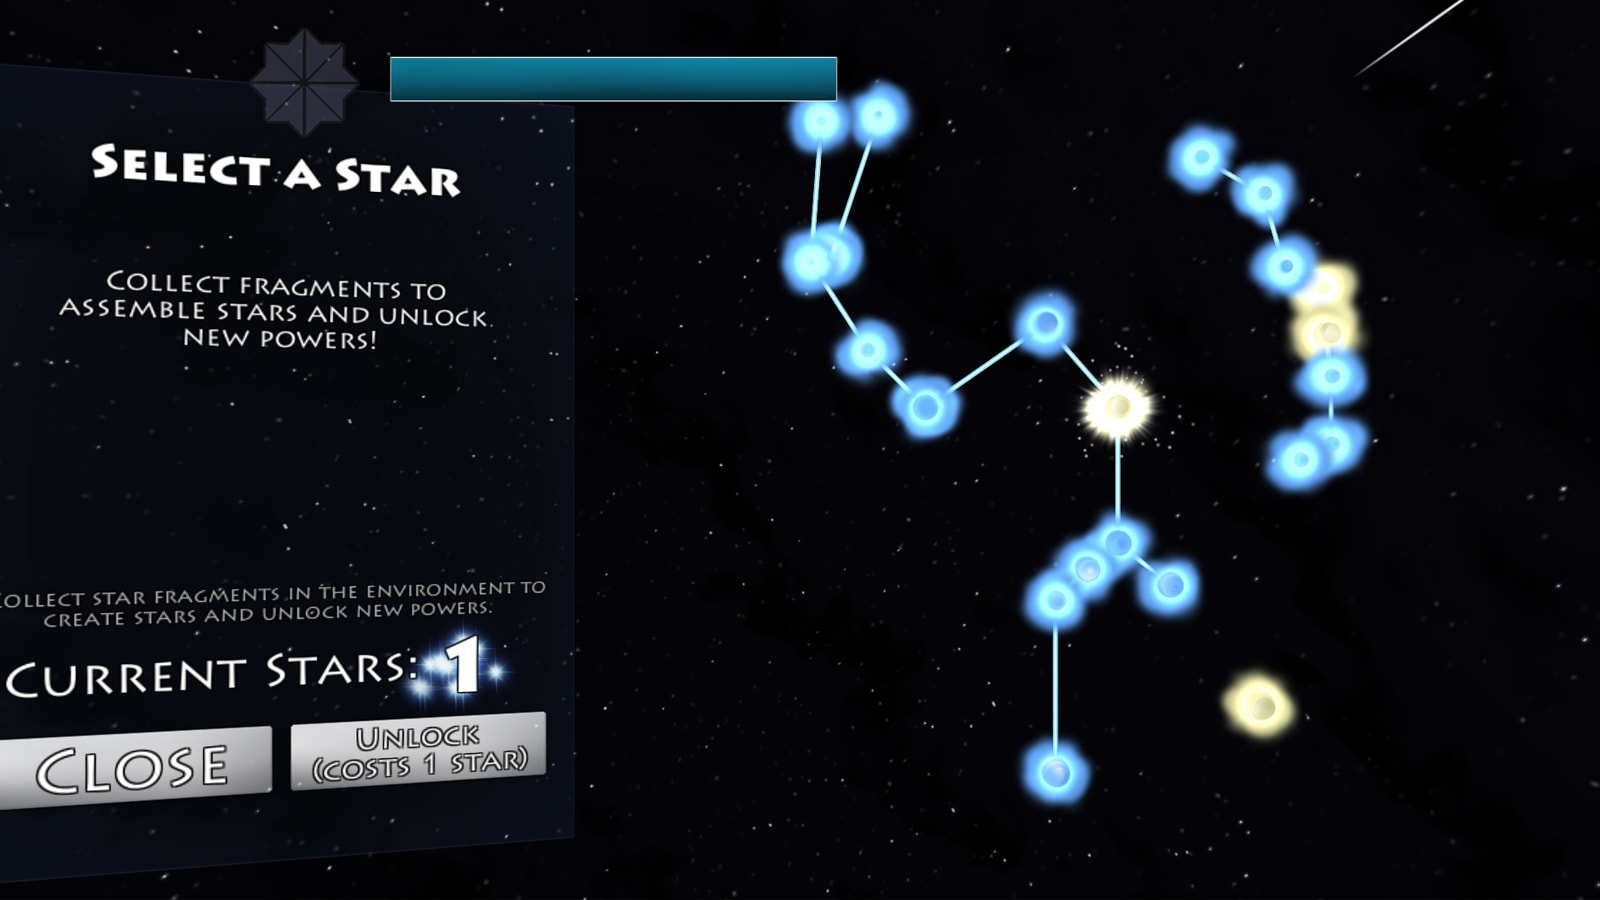 The constellation Orion in the game's "select a star" menu